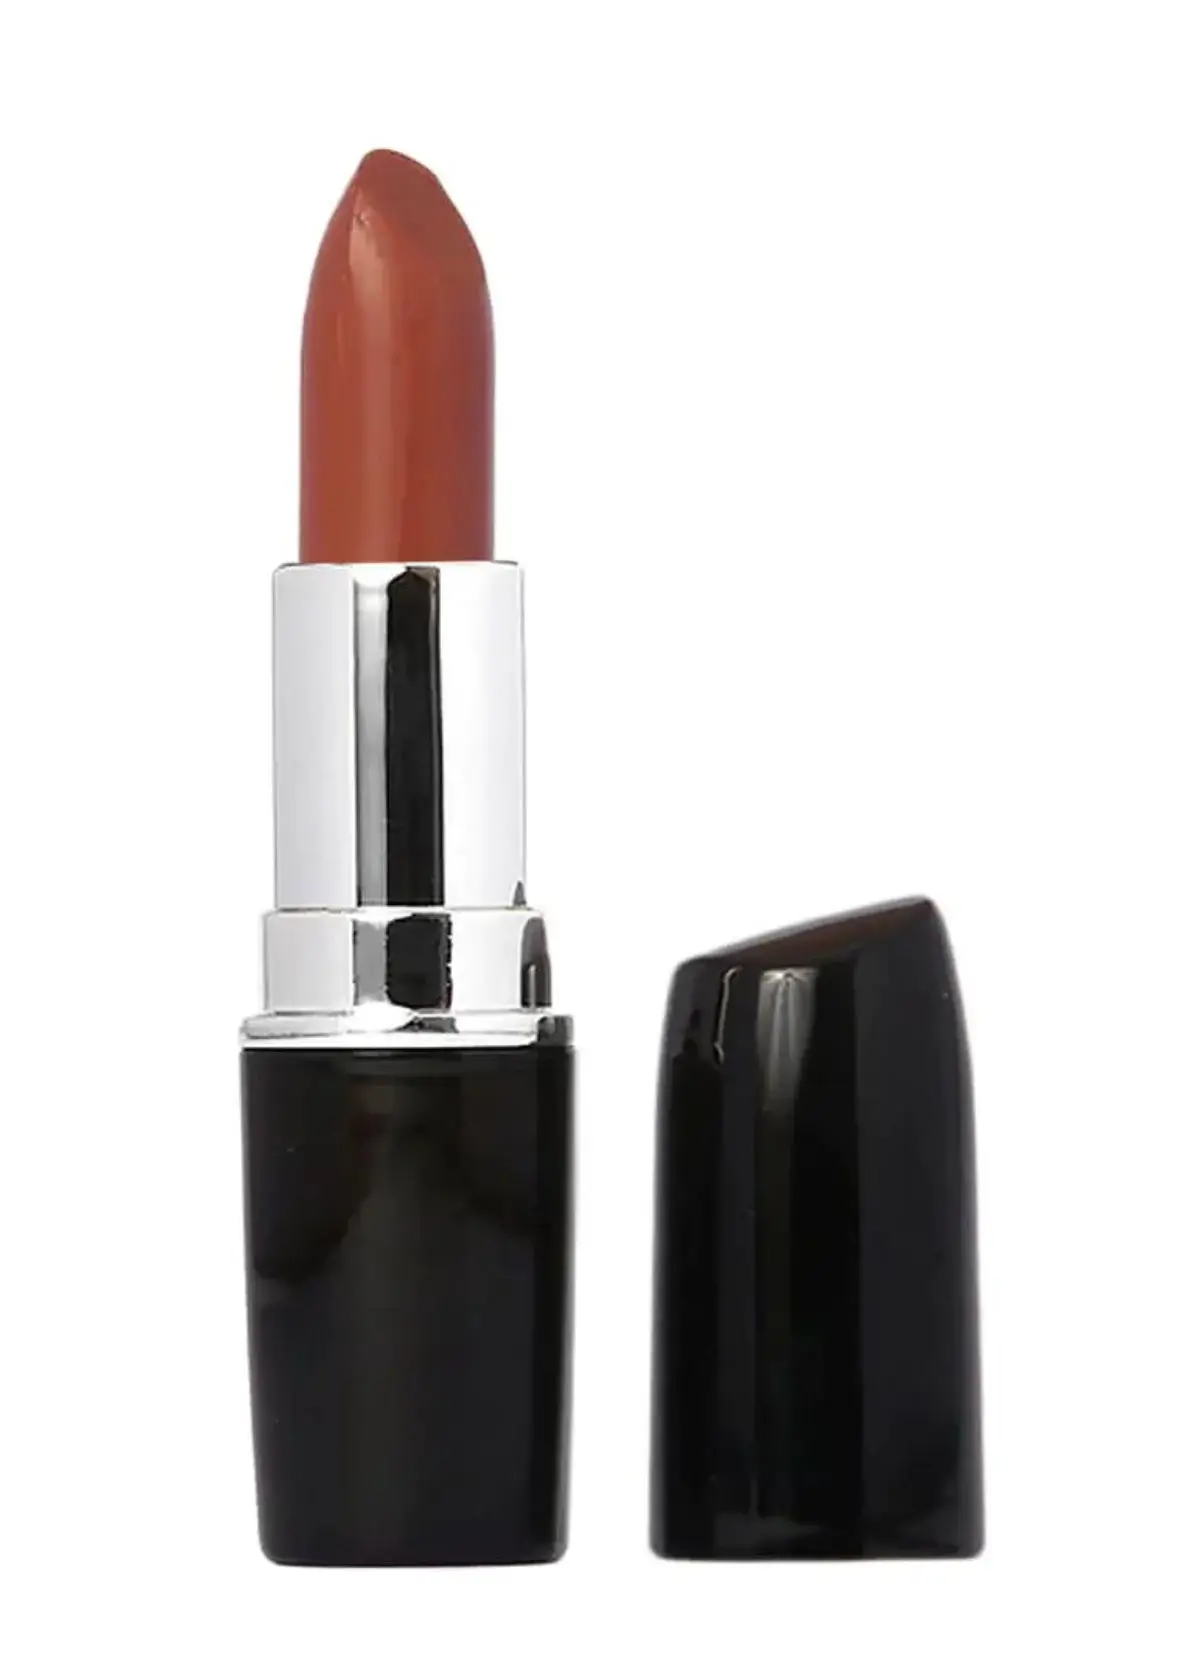 How to choose the right terracotta lipstick?